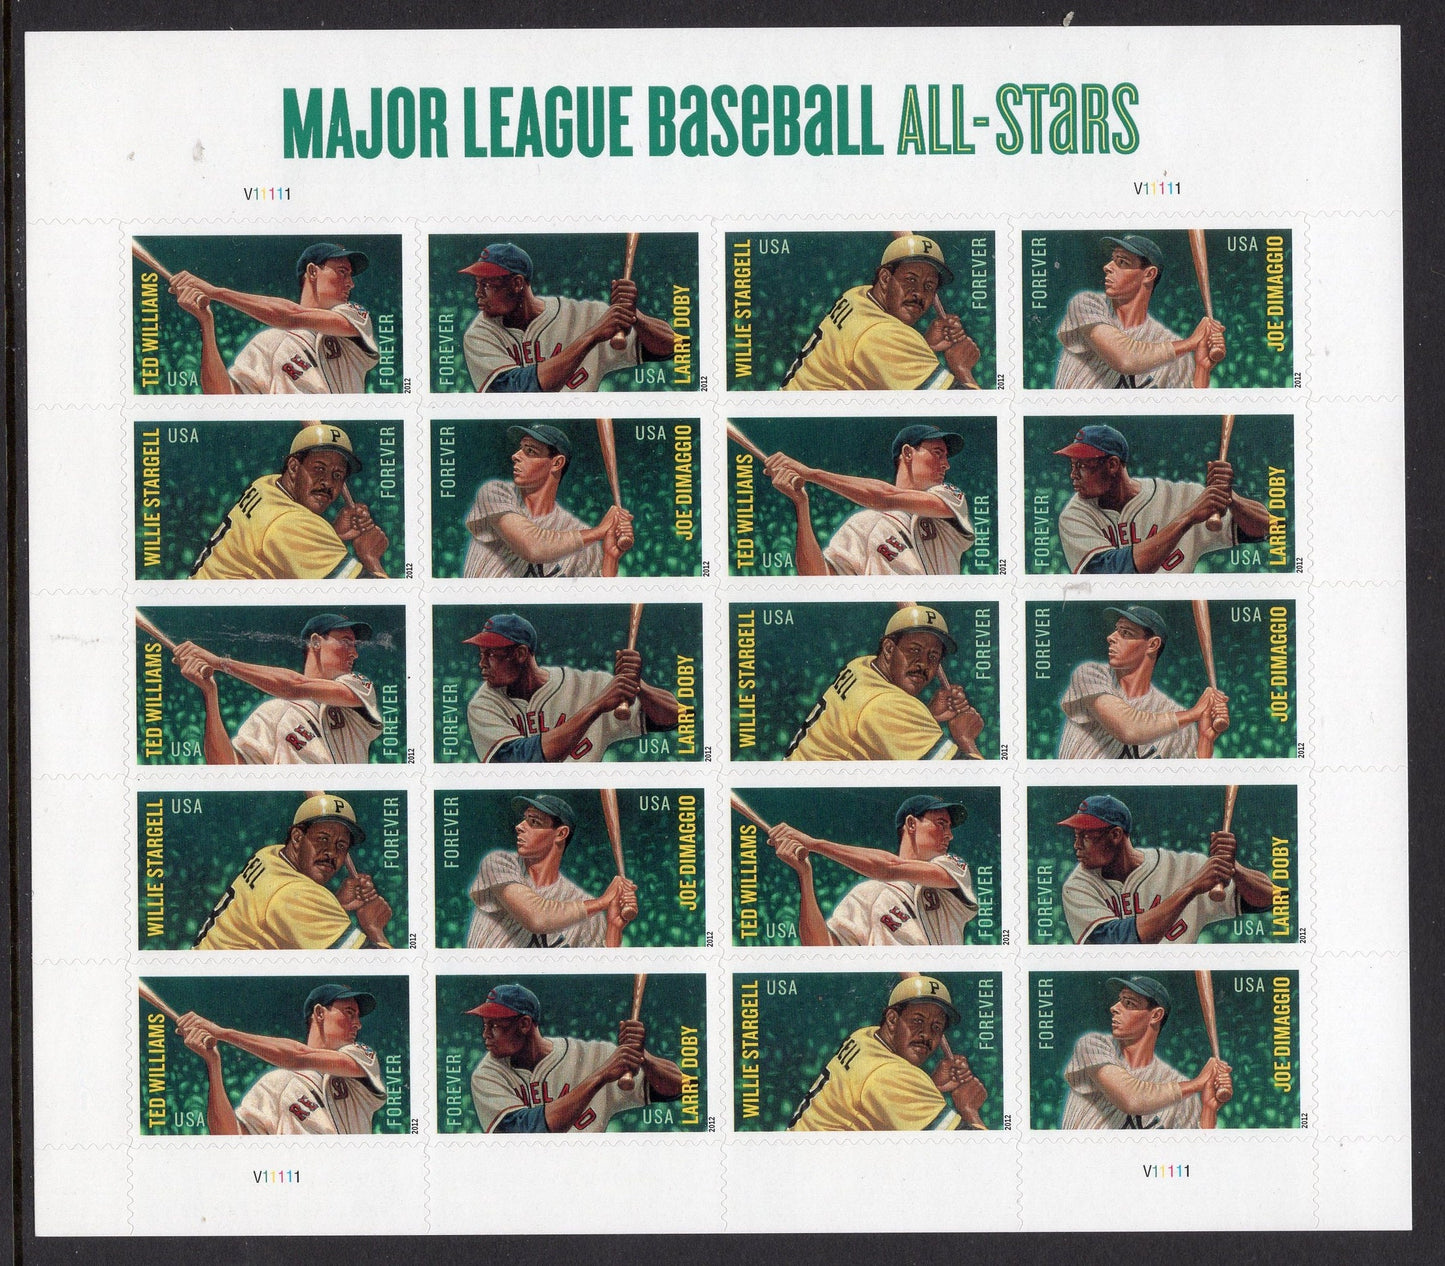 ALL - sTARS Williams Doby Stargell DiMaggio 1 Sheet of 20 Baseball Unused US Postage Stamps - Issued in 2012  - s4694-97 -